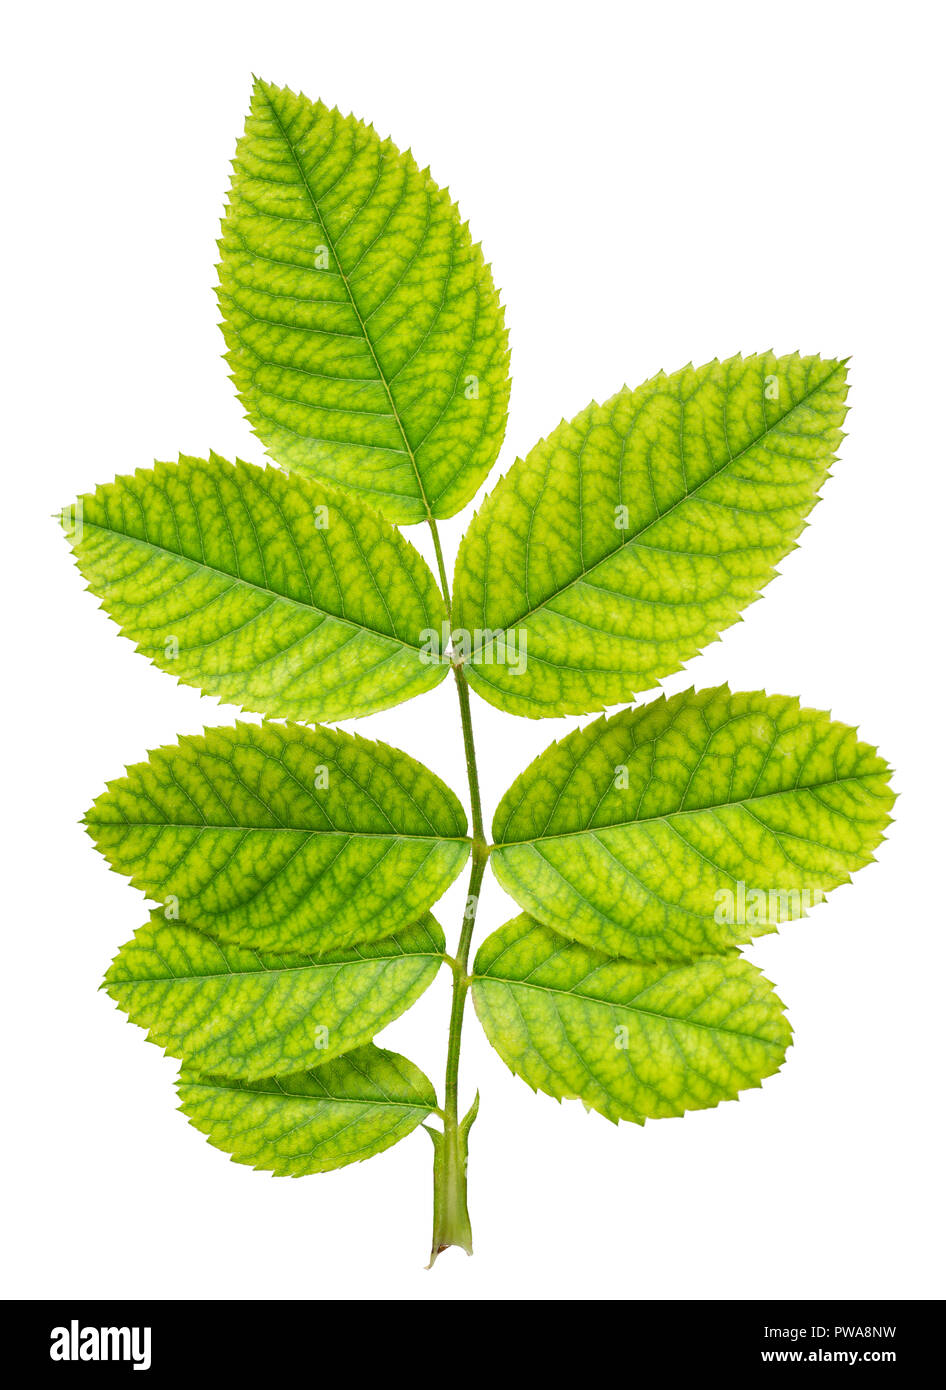 green leaf with veins of rose is isolated on white background, close up Stock Photo